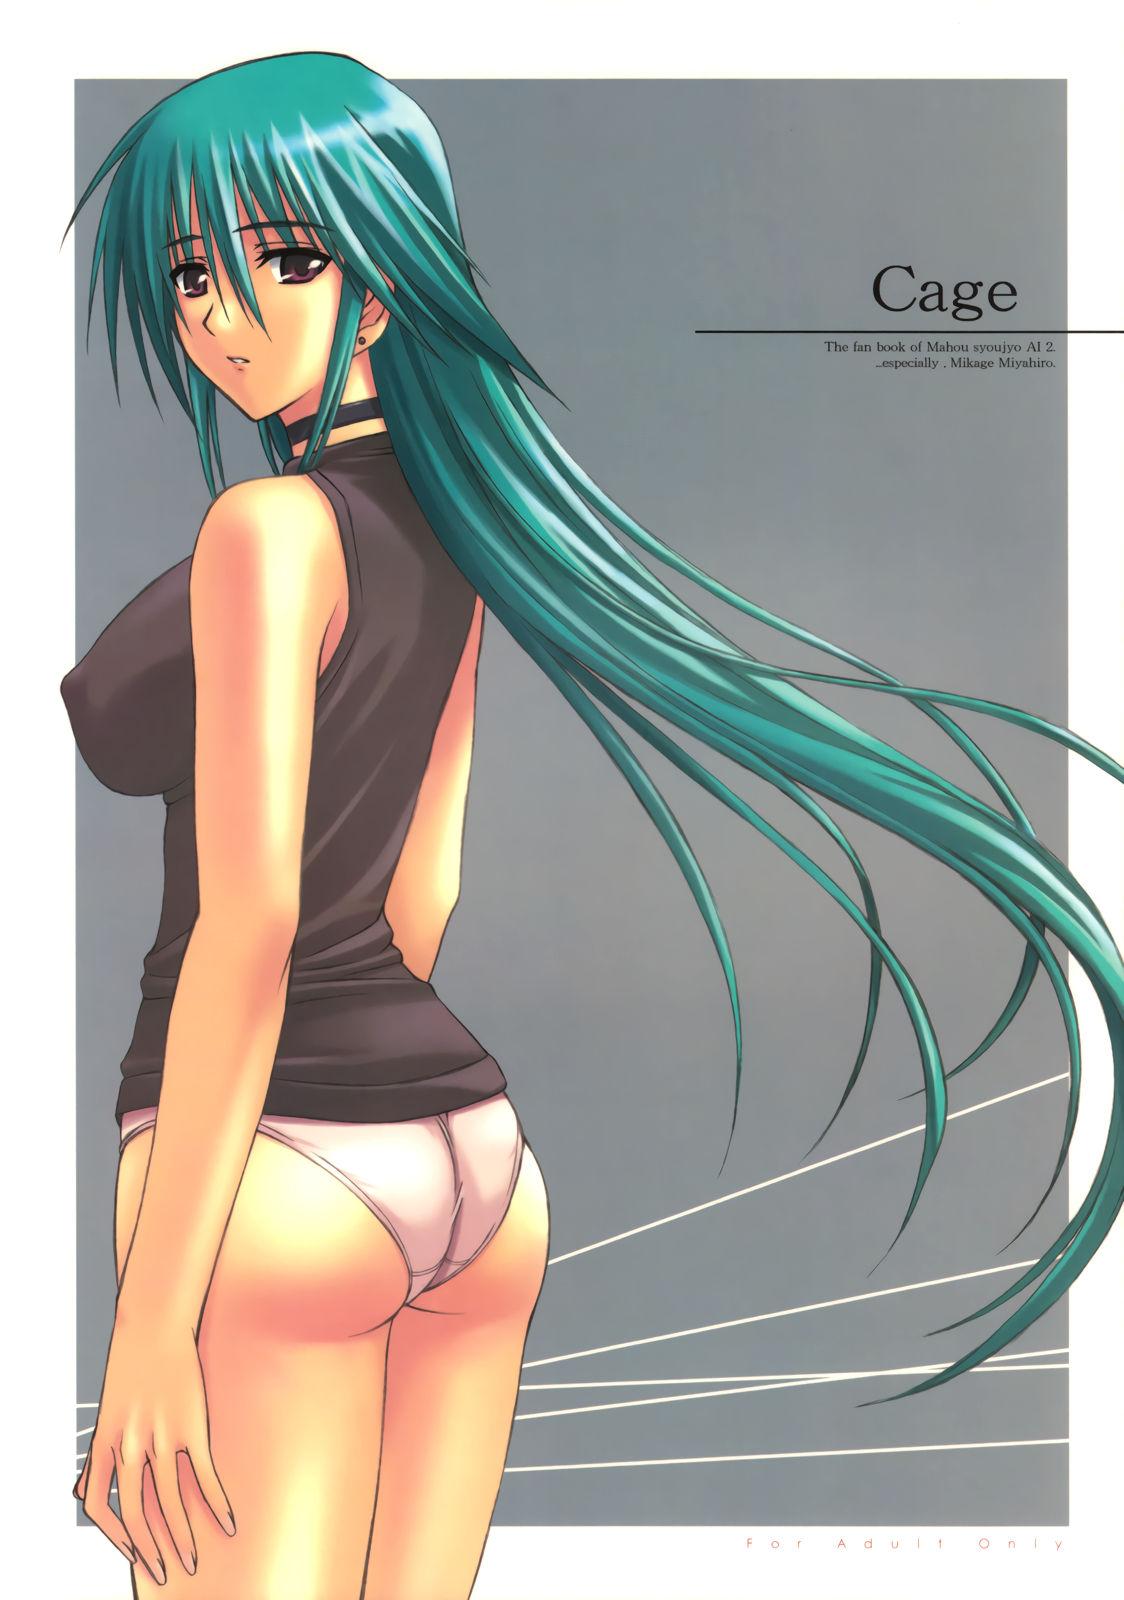 Cage 0